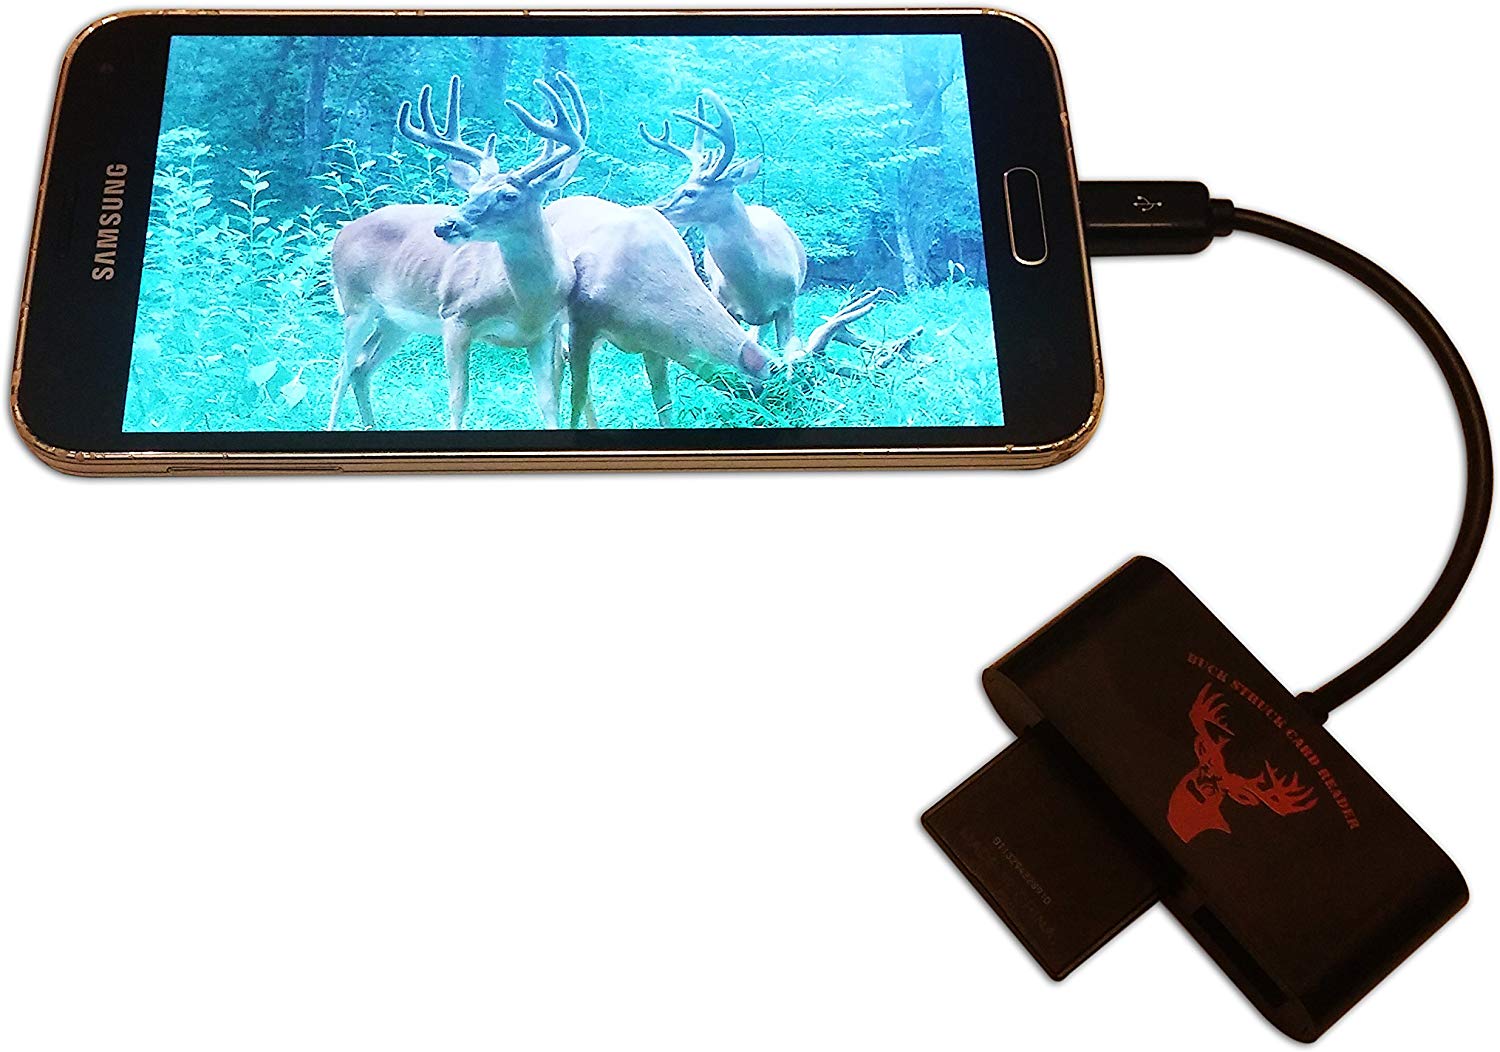 BuckStruck Game and Trail Camera Viewer for Android Devices, Micro USB Connection